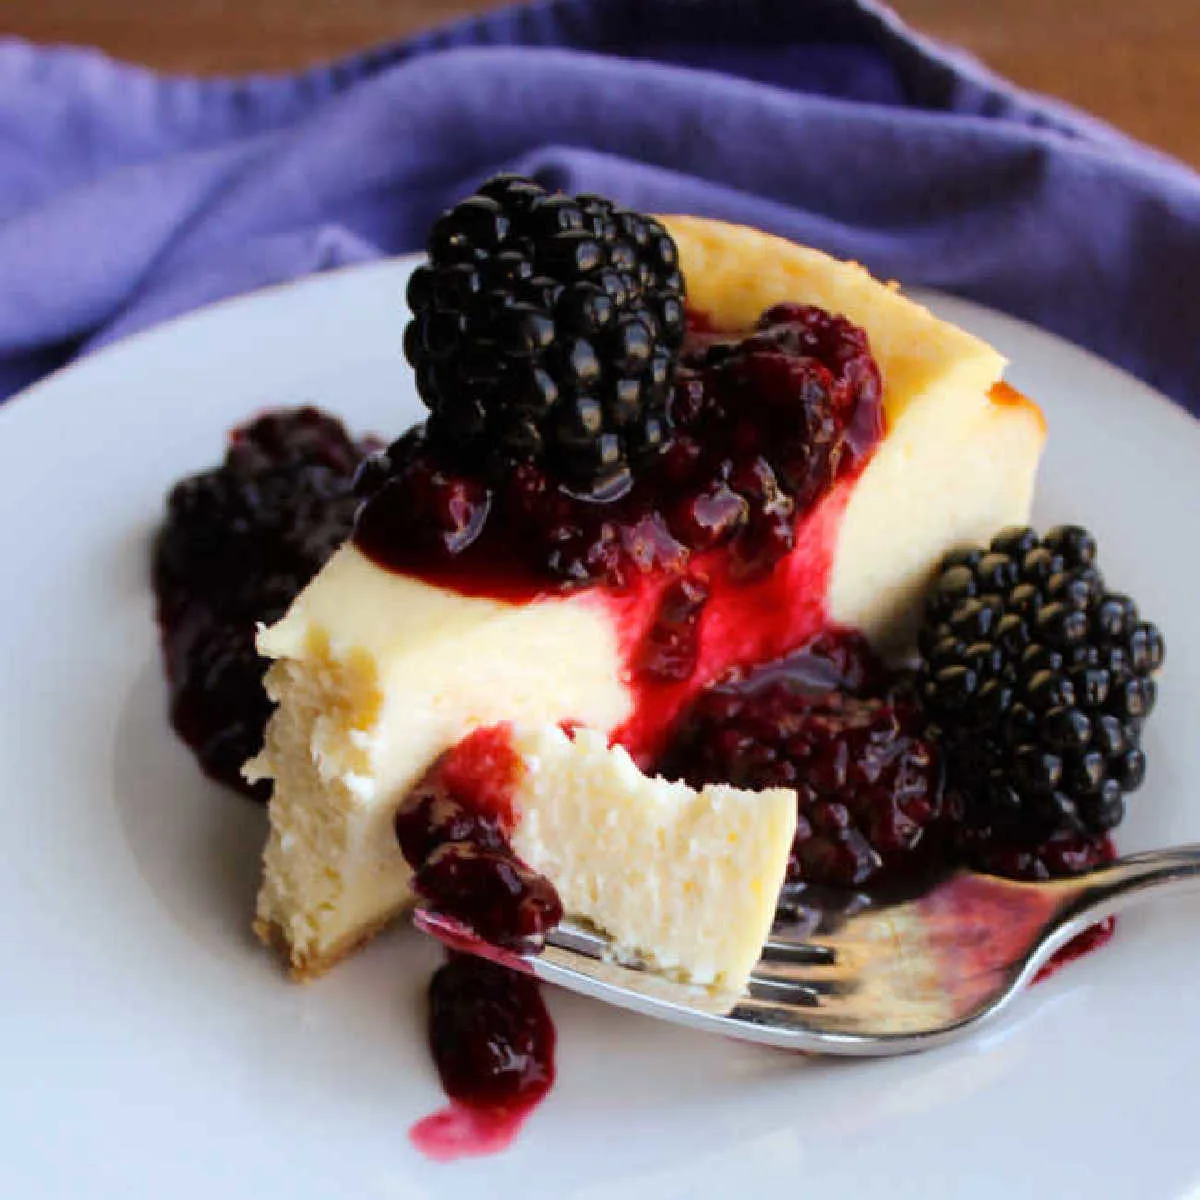 slice of creamy cheesecake with blackberry sauce.